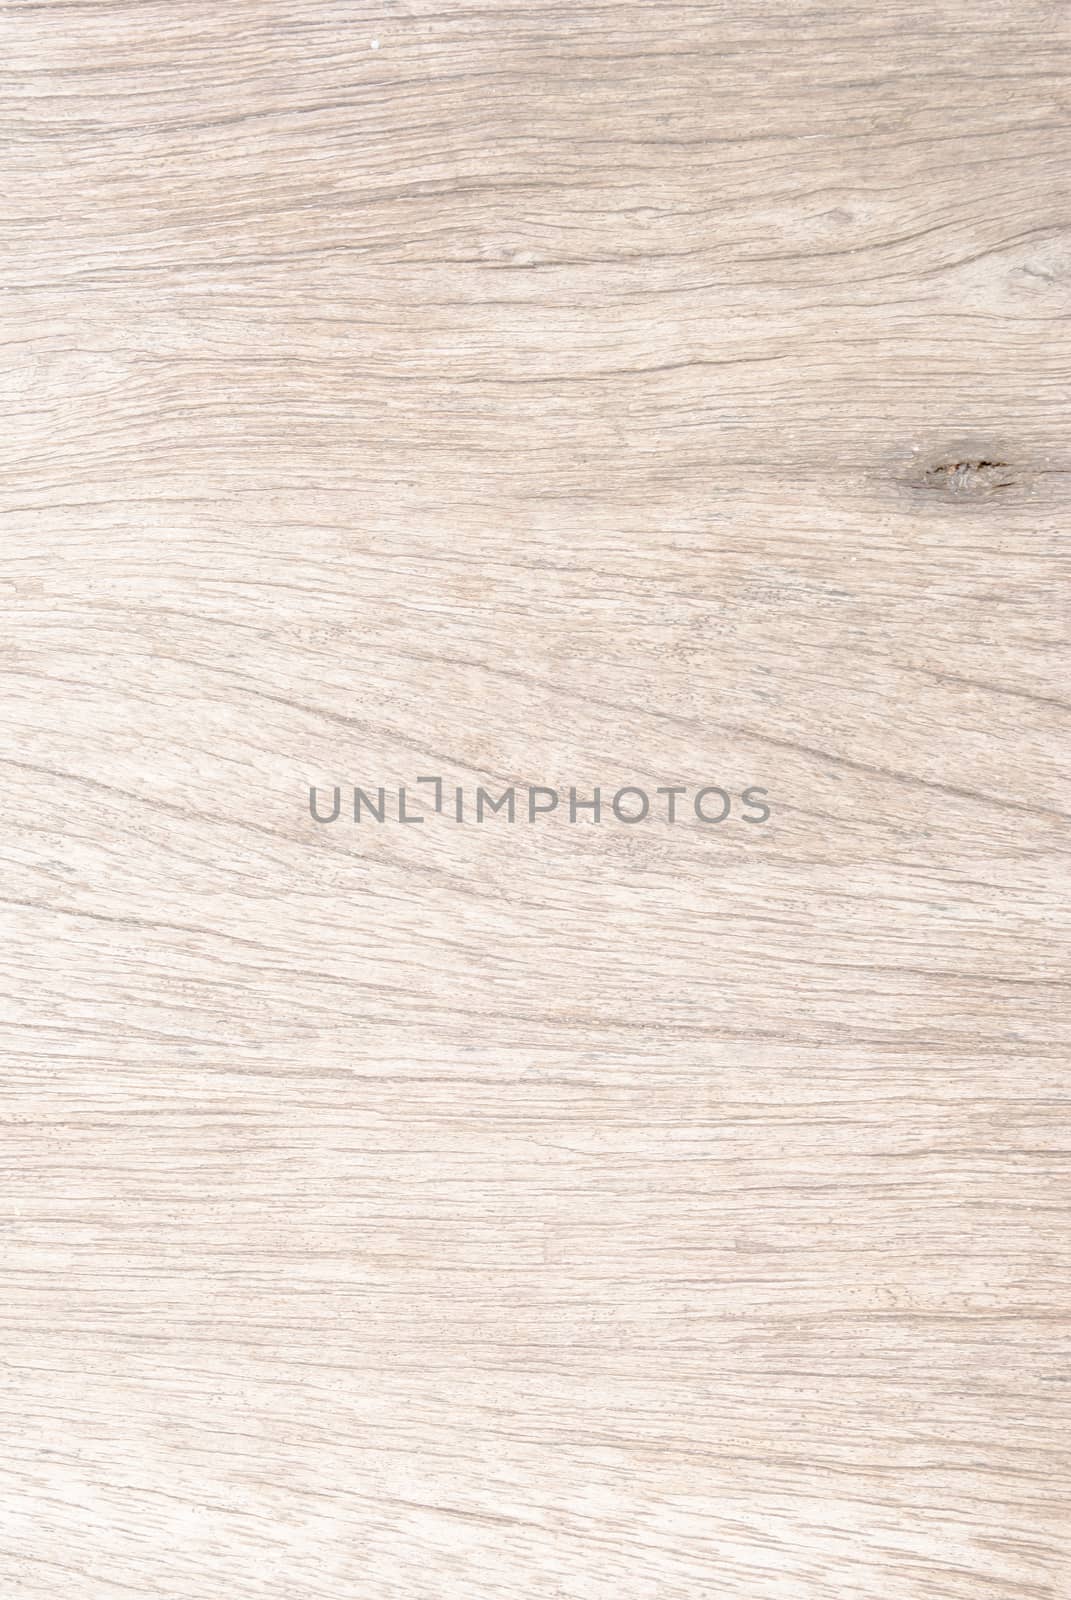 Natural old wooden texture for background by rakoptonLPN